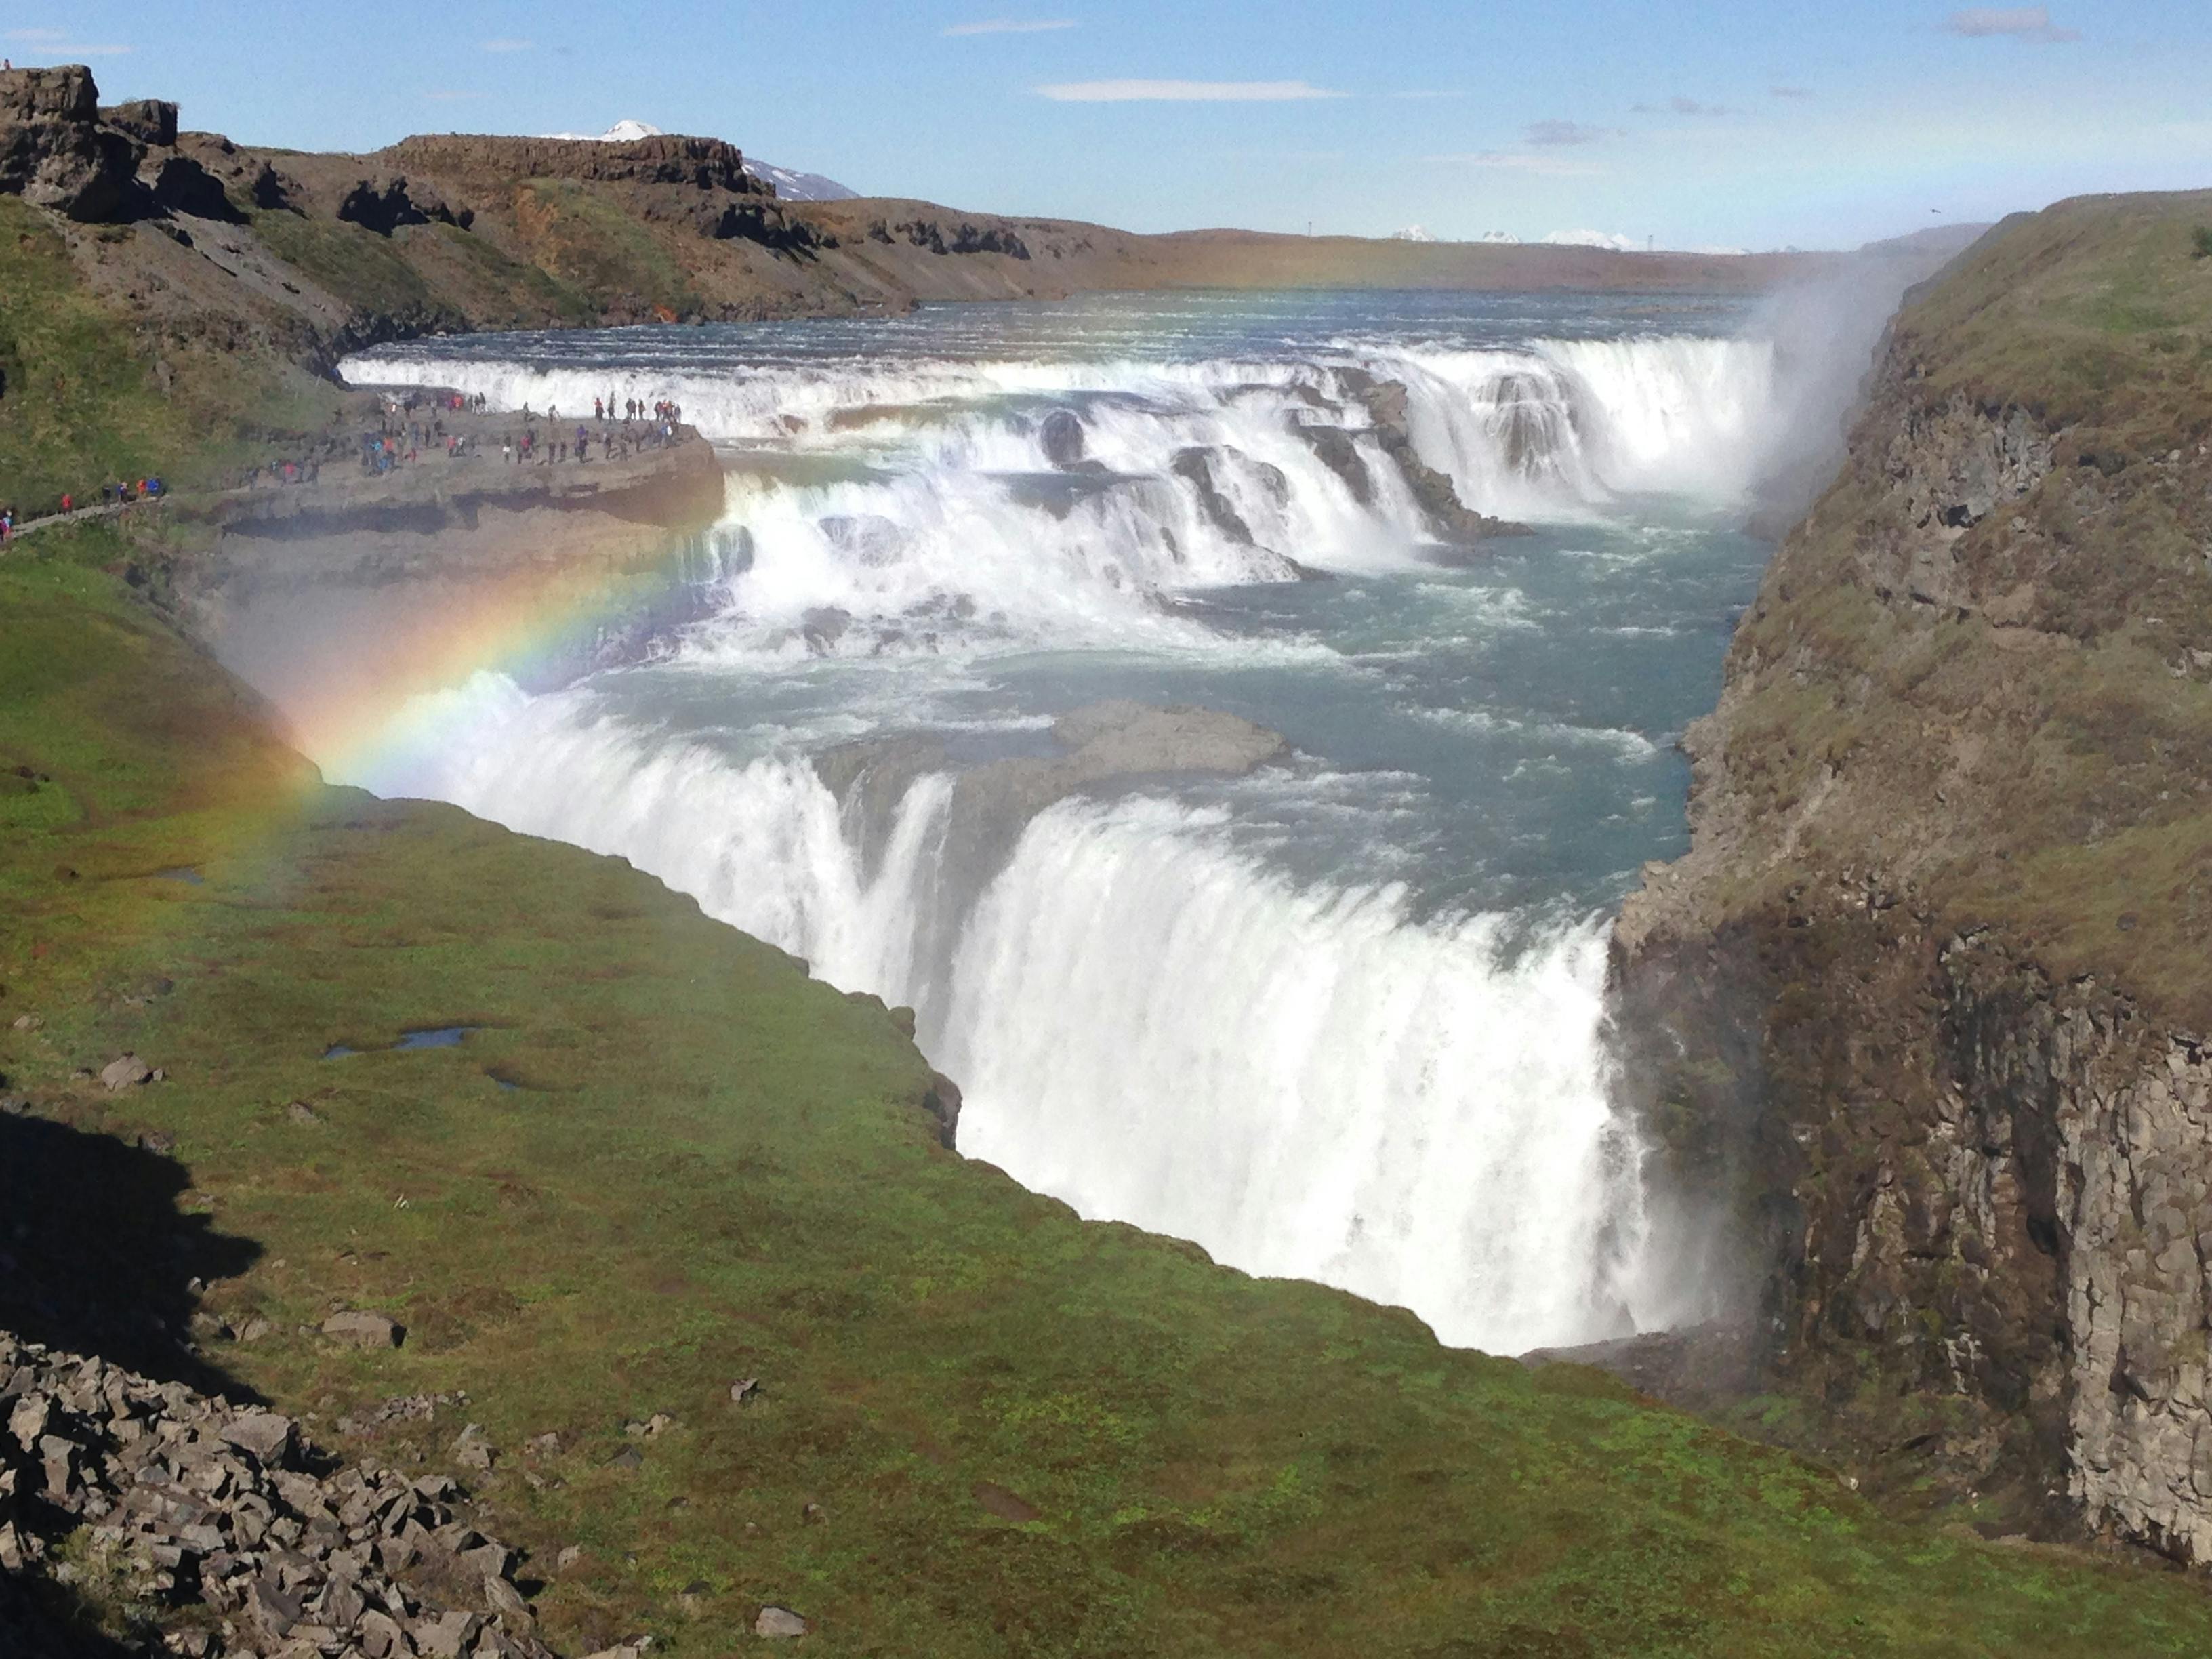 Product image for Golden Circle Tour: The Best Way to Experience Iceland